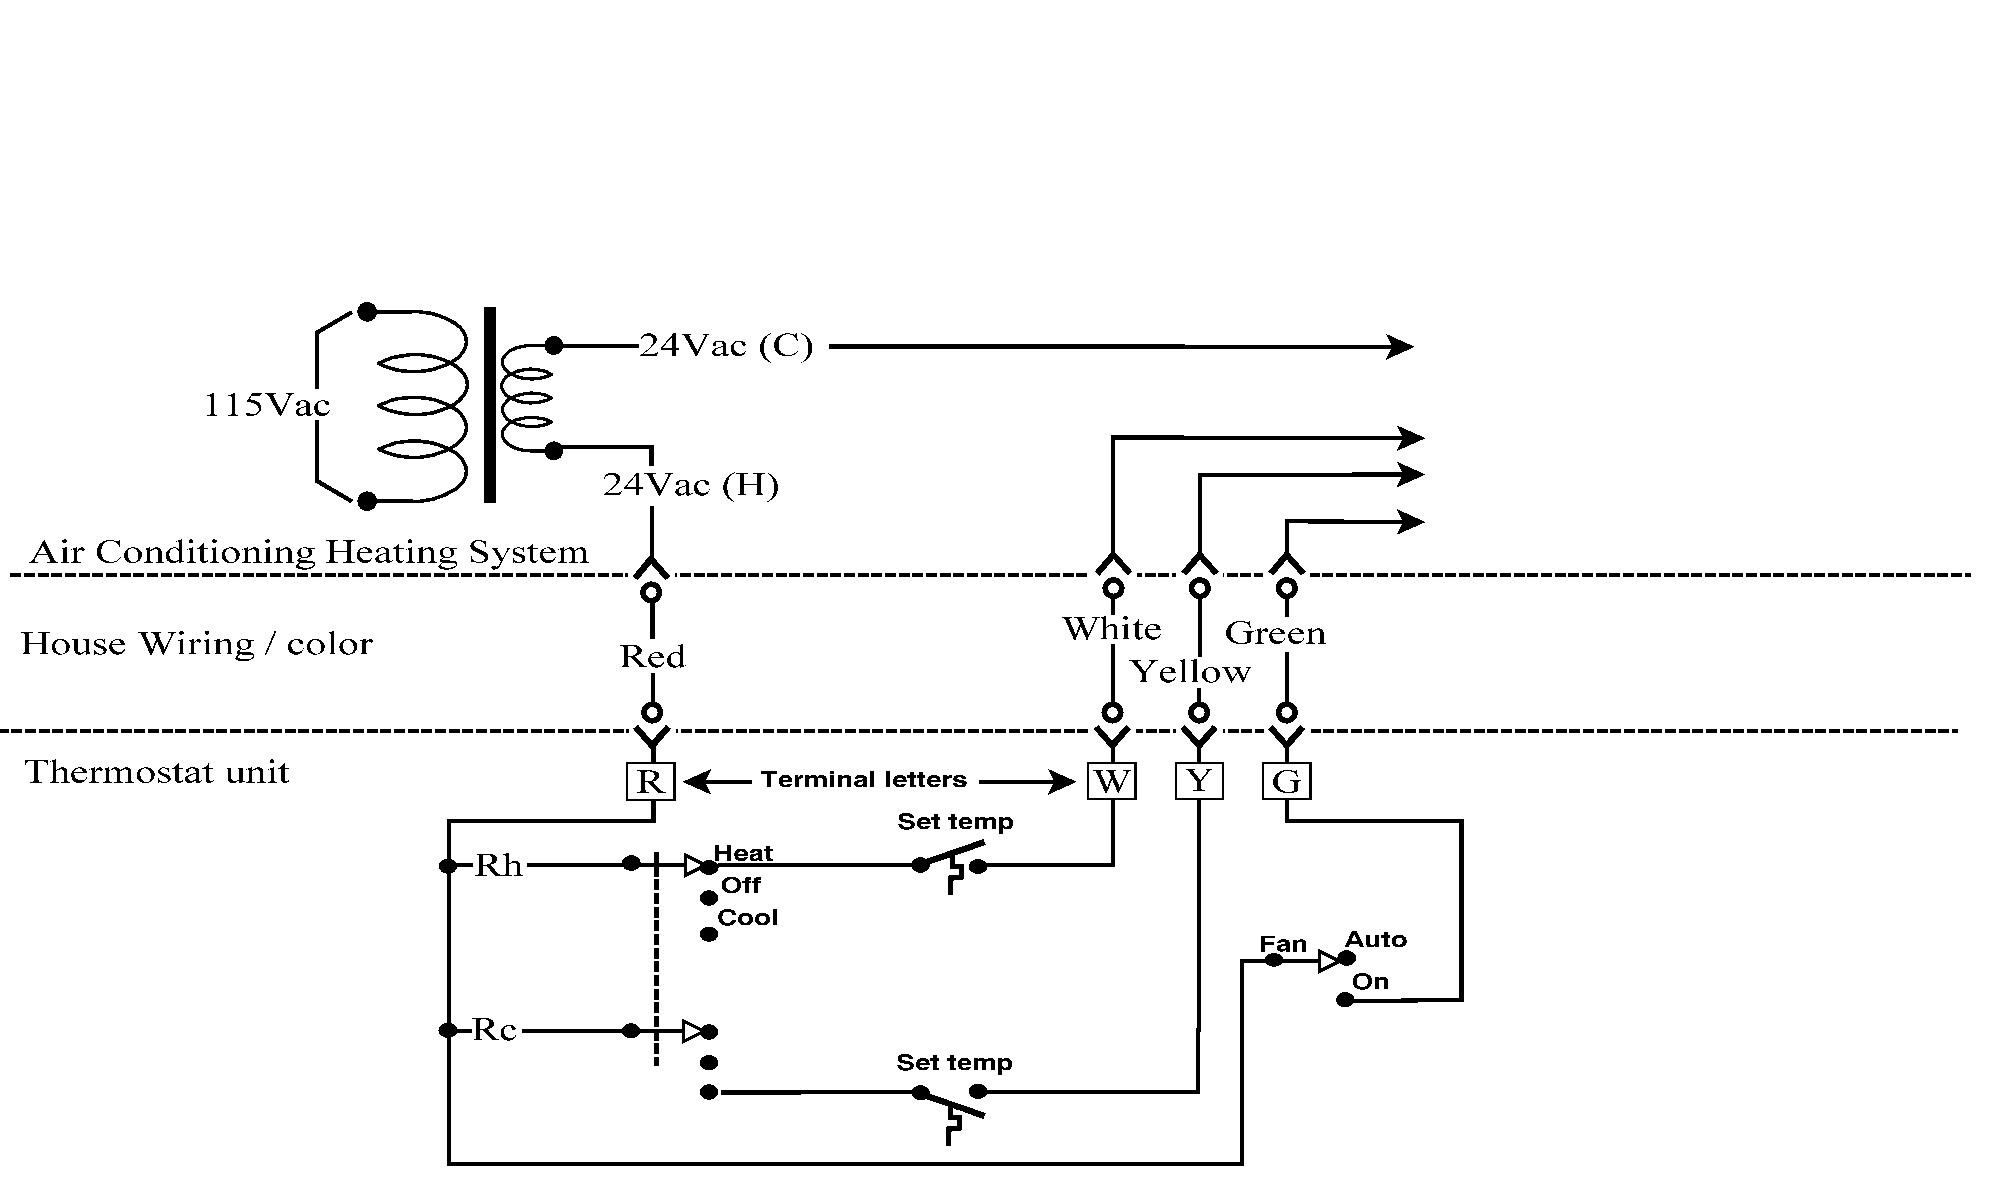 Jumper Cable Connection Diagram thermostat Signals and Wiring Of Jumper Cable Connection Diagram